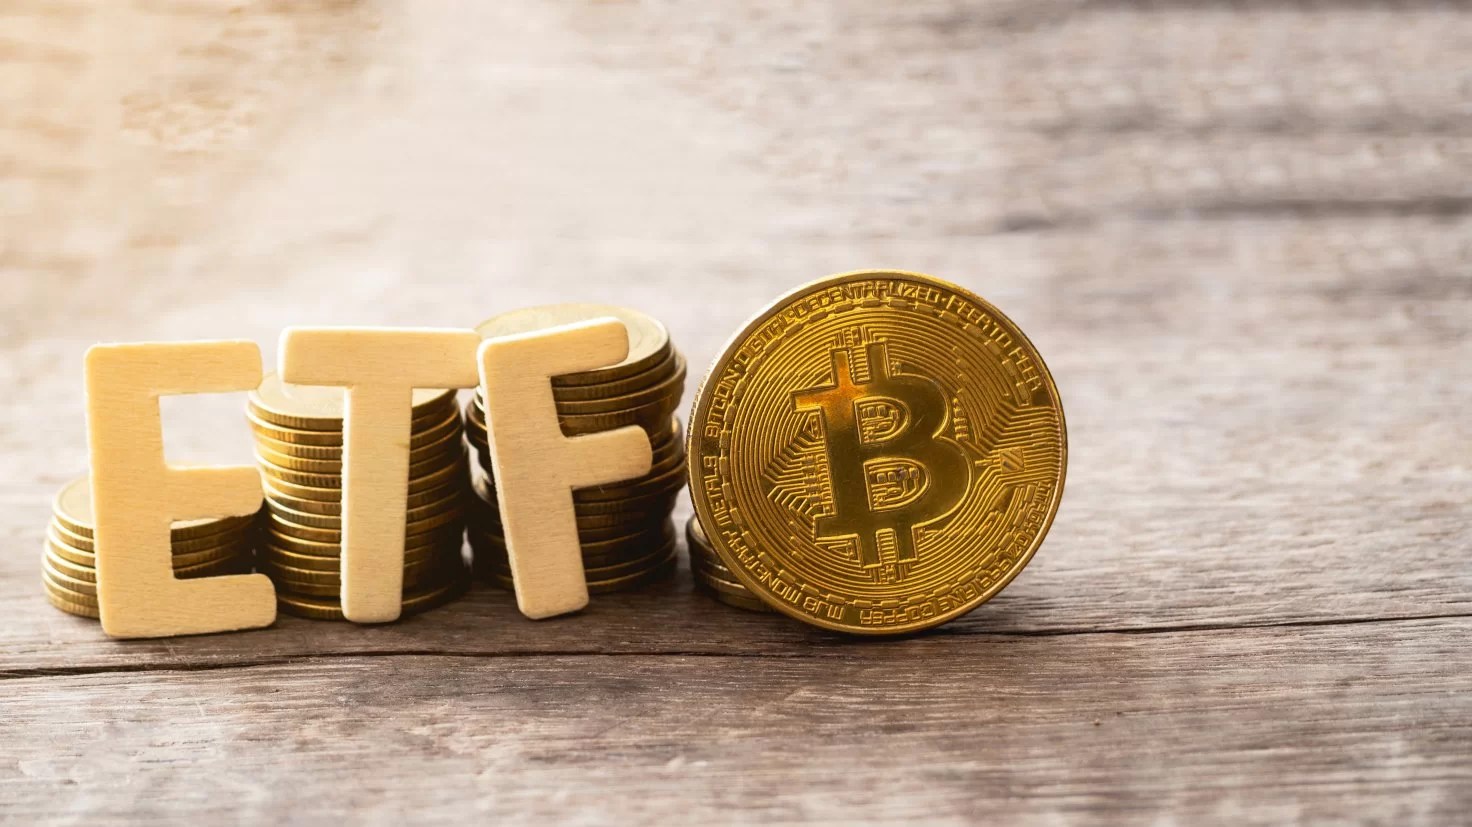 Bitcoin ETFs Surge With $384 Million Inflows, 2nd Highest This Month